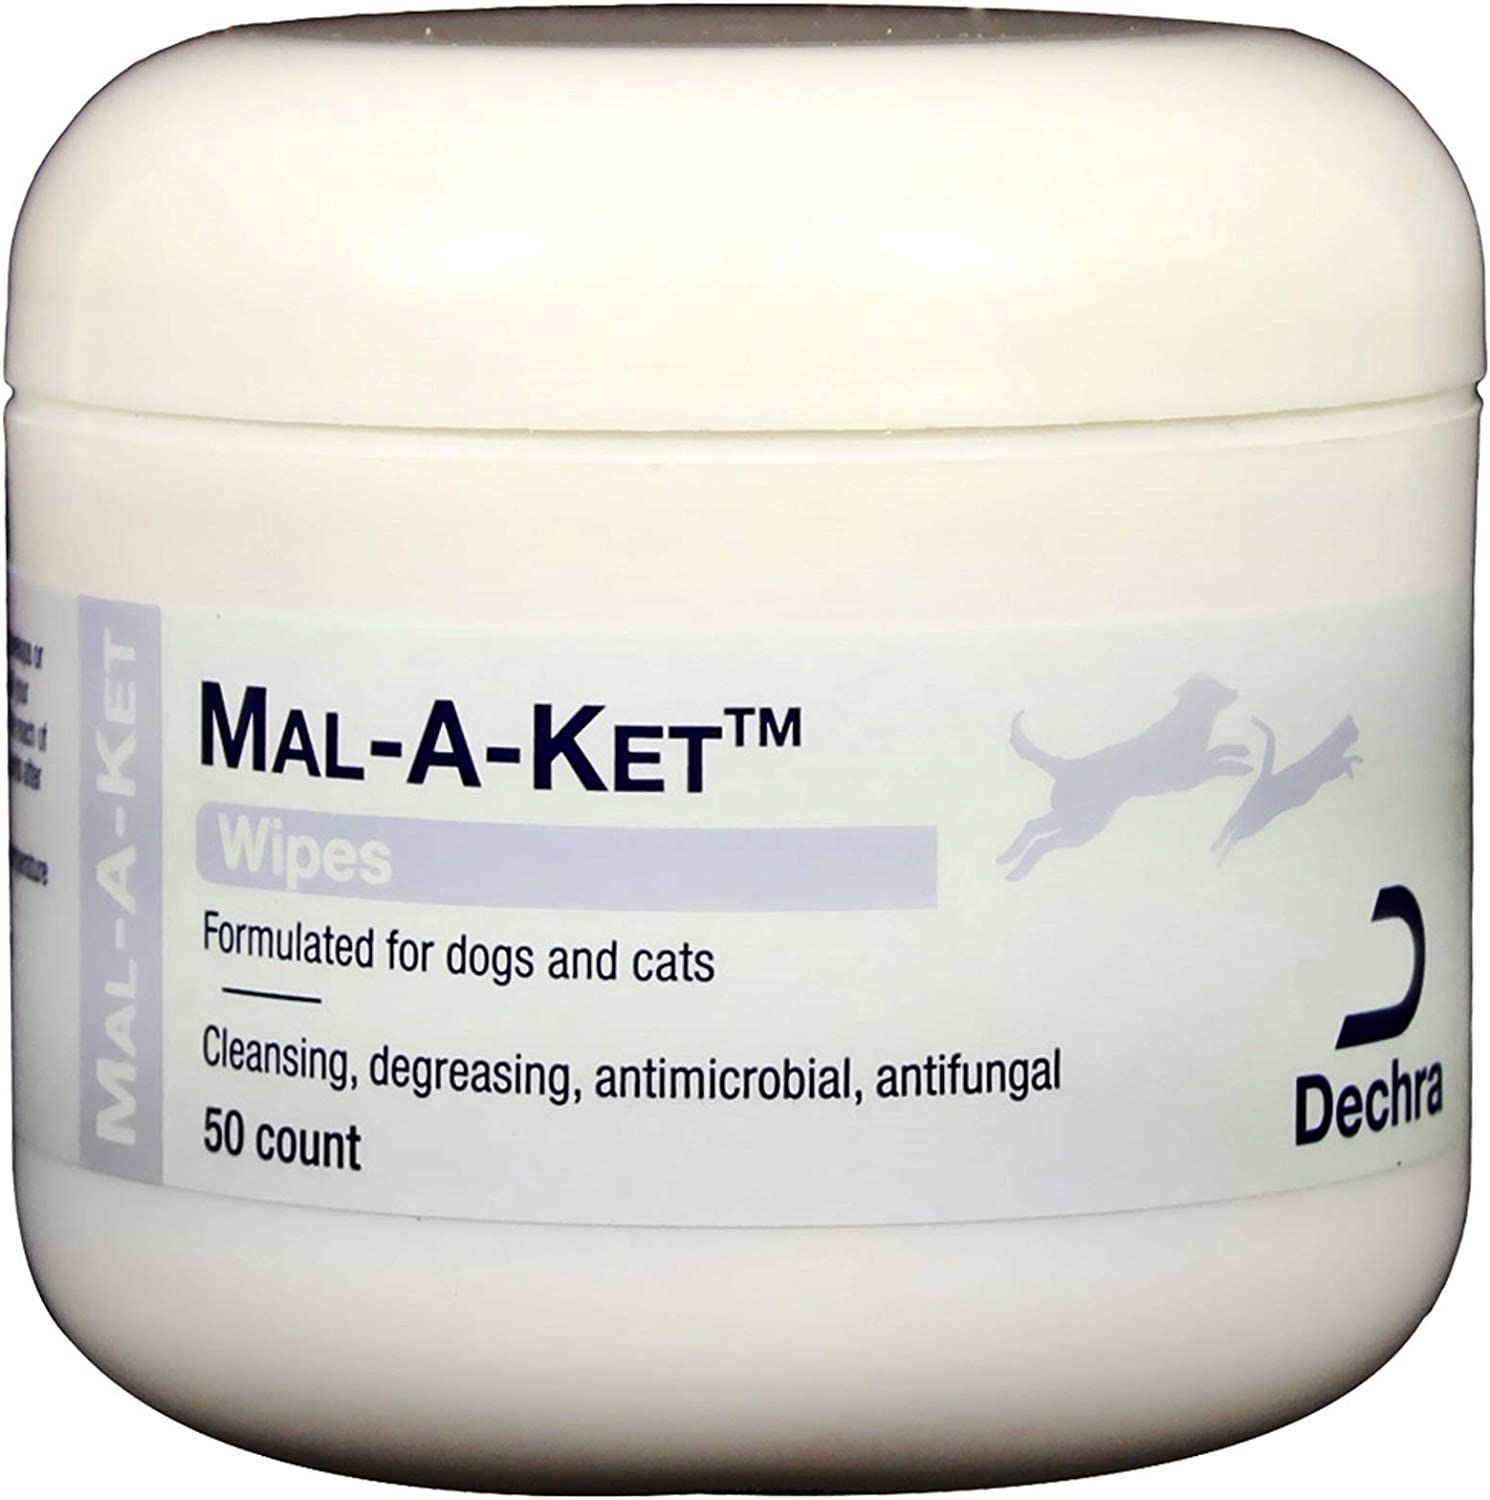 Mal-a-ket Wipes for Support Healthy Skin Dogs, Cats 50ct by Dechra Basic 